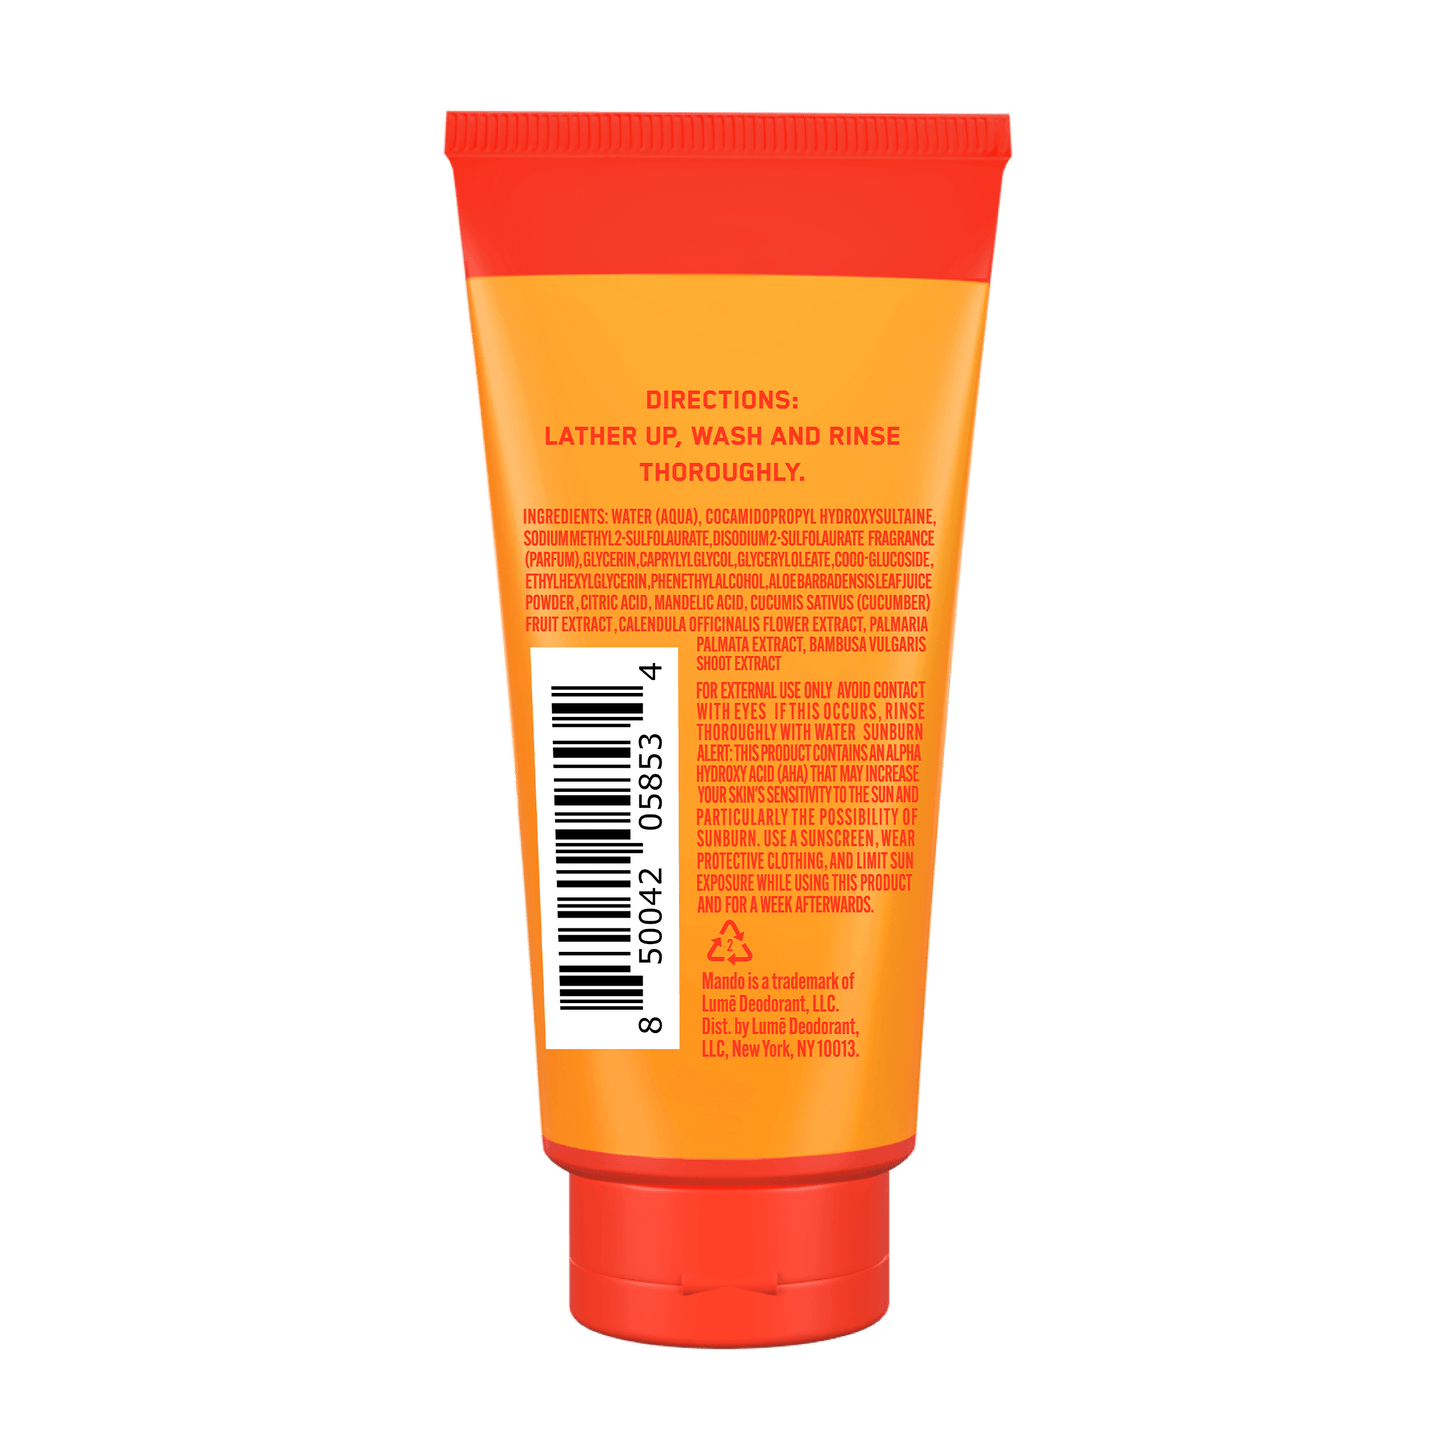 yellow orange tube of Mando mini body wash in bourbon leather scent with directions text